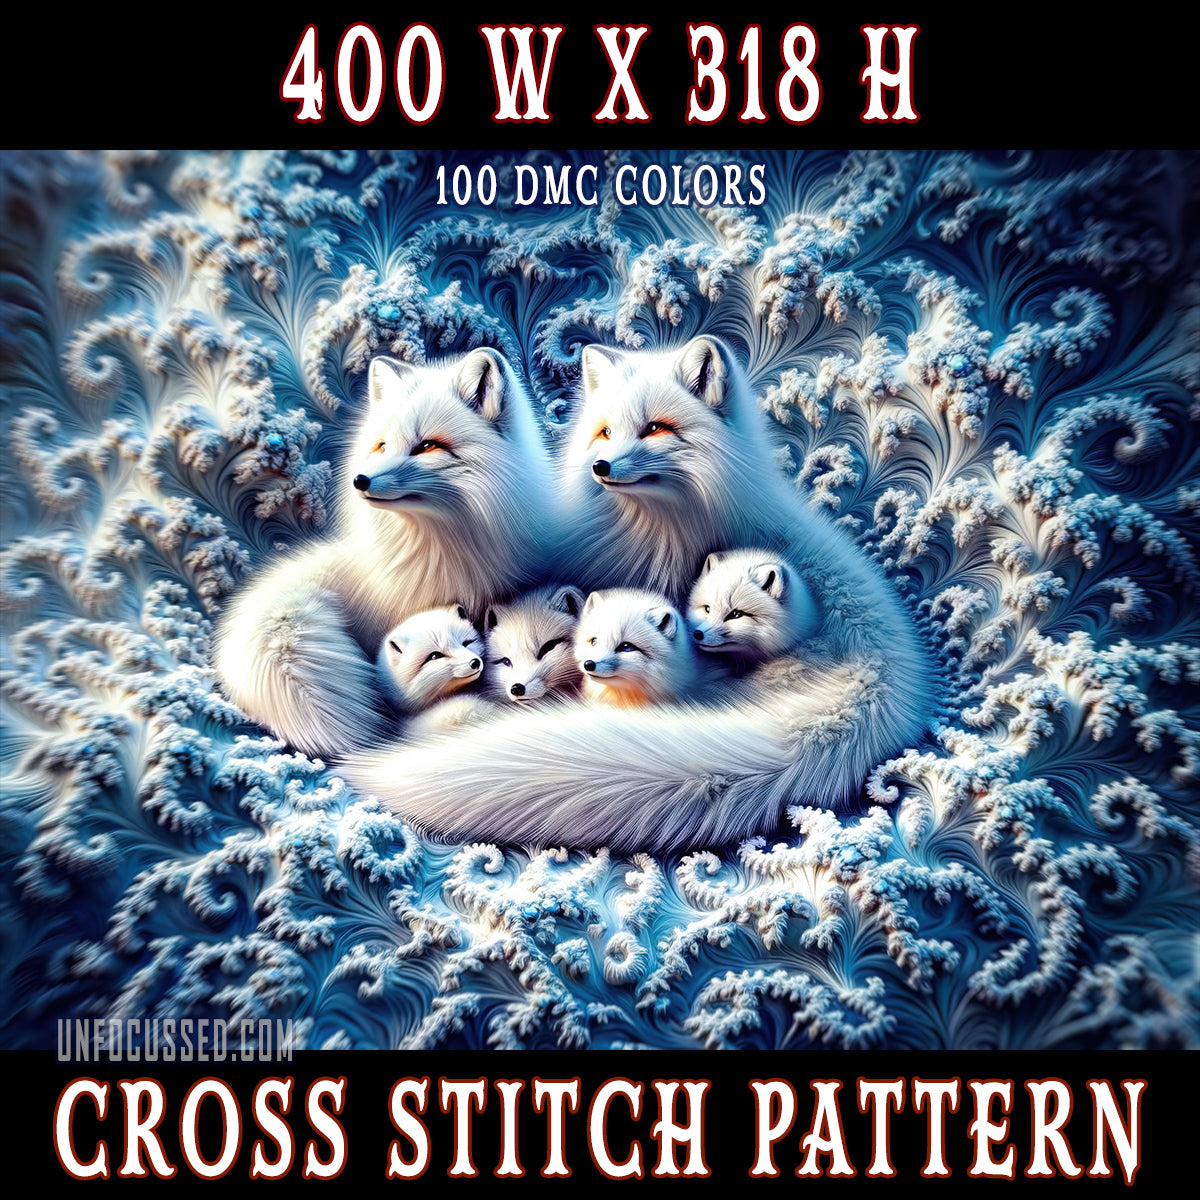 The Foxes of Fractal Valley Cross Stitch Pattern